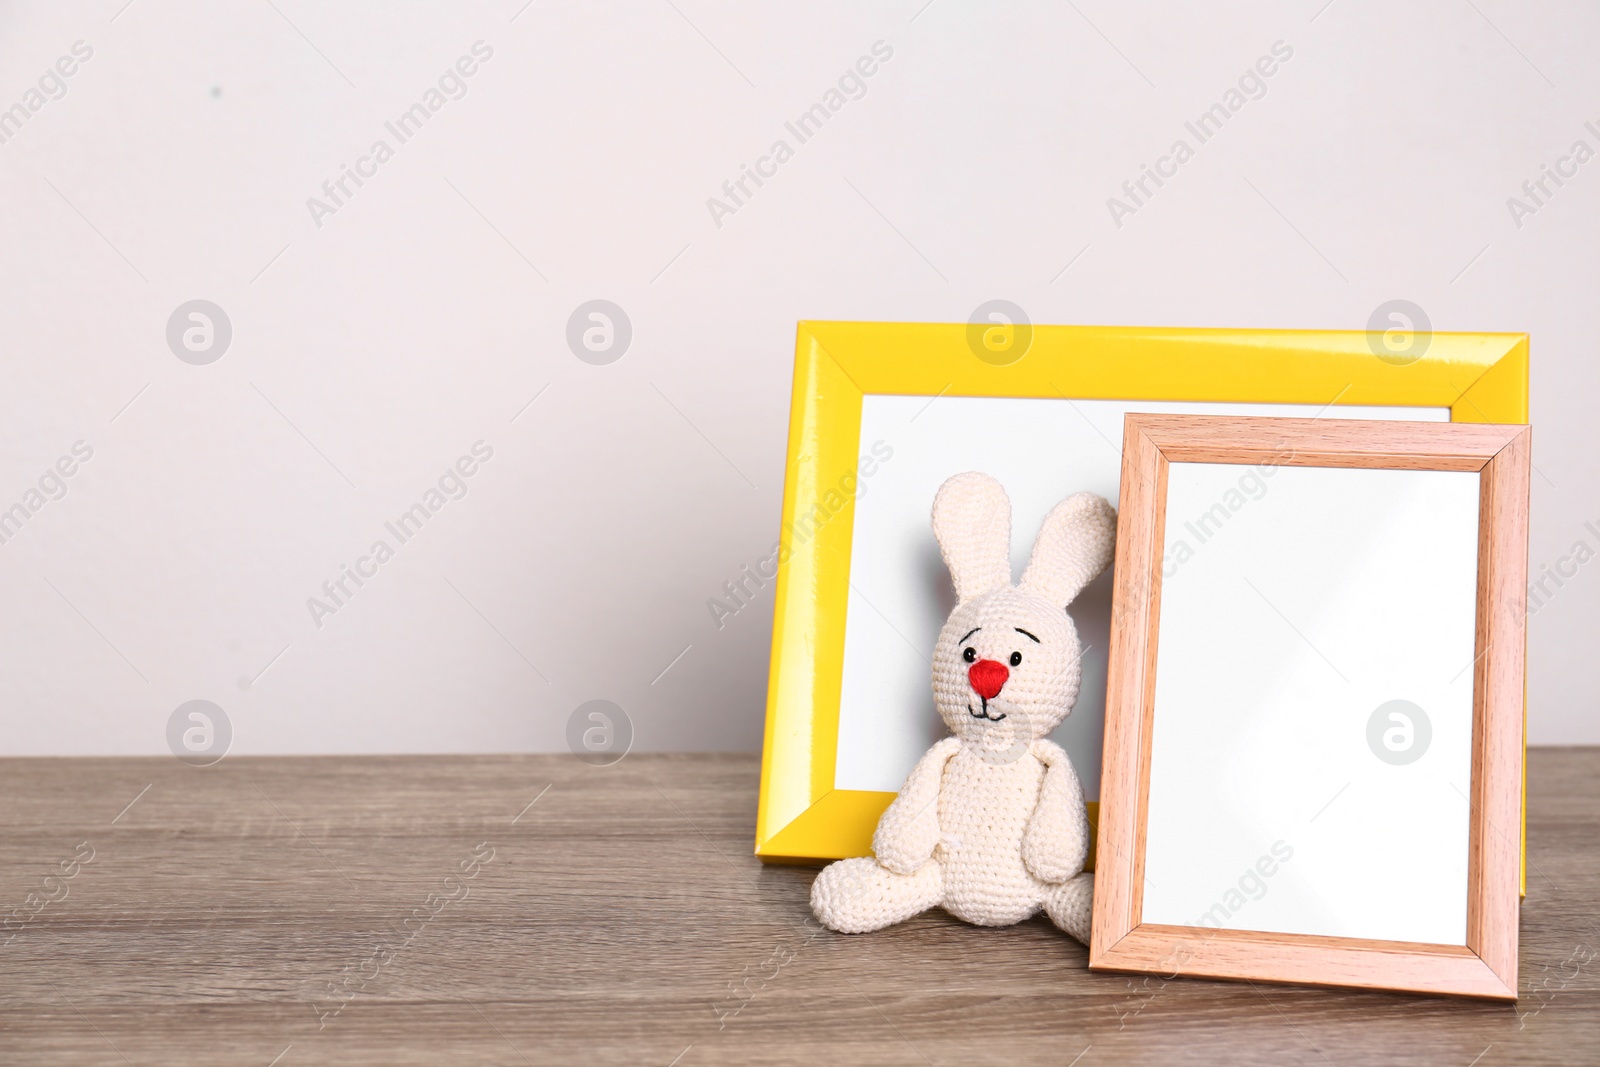 Photo of Photo frames and adorable toy bunny on table against light background, space for text. Child room elements